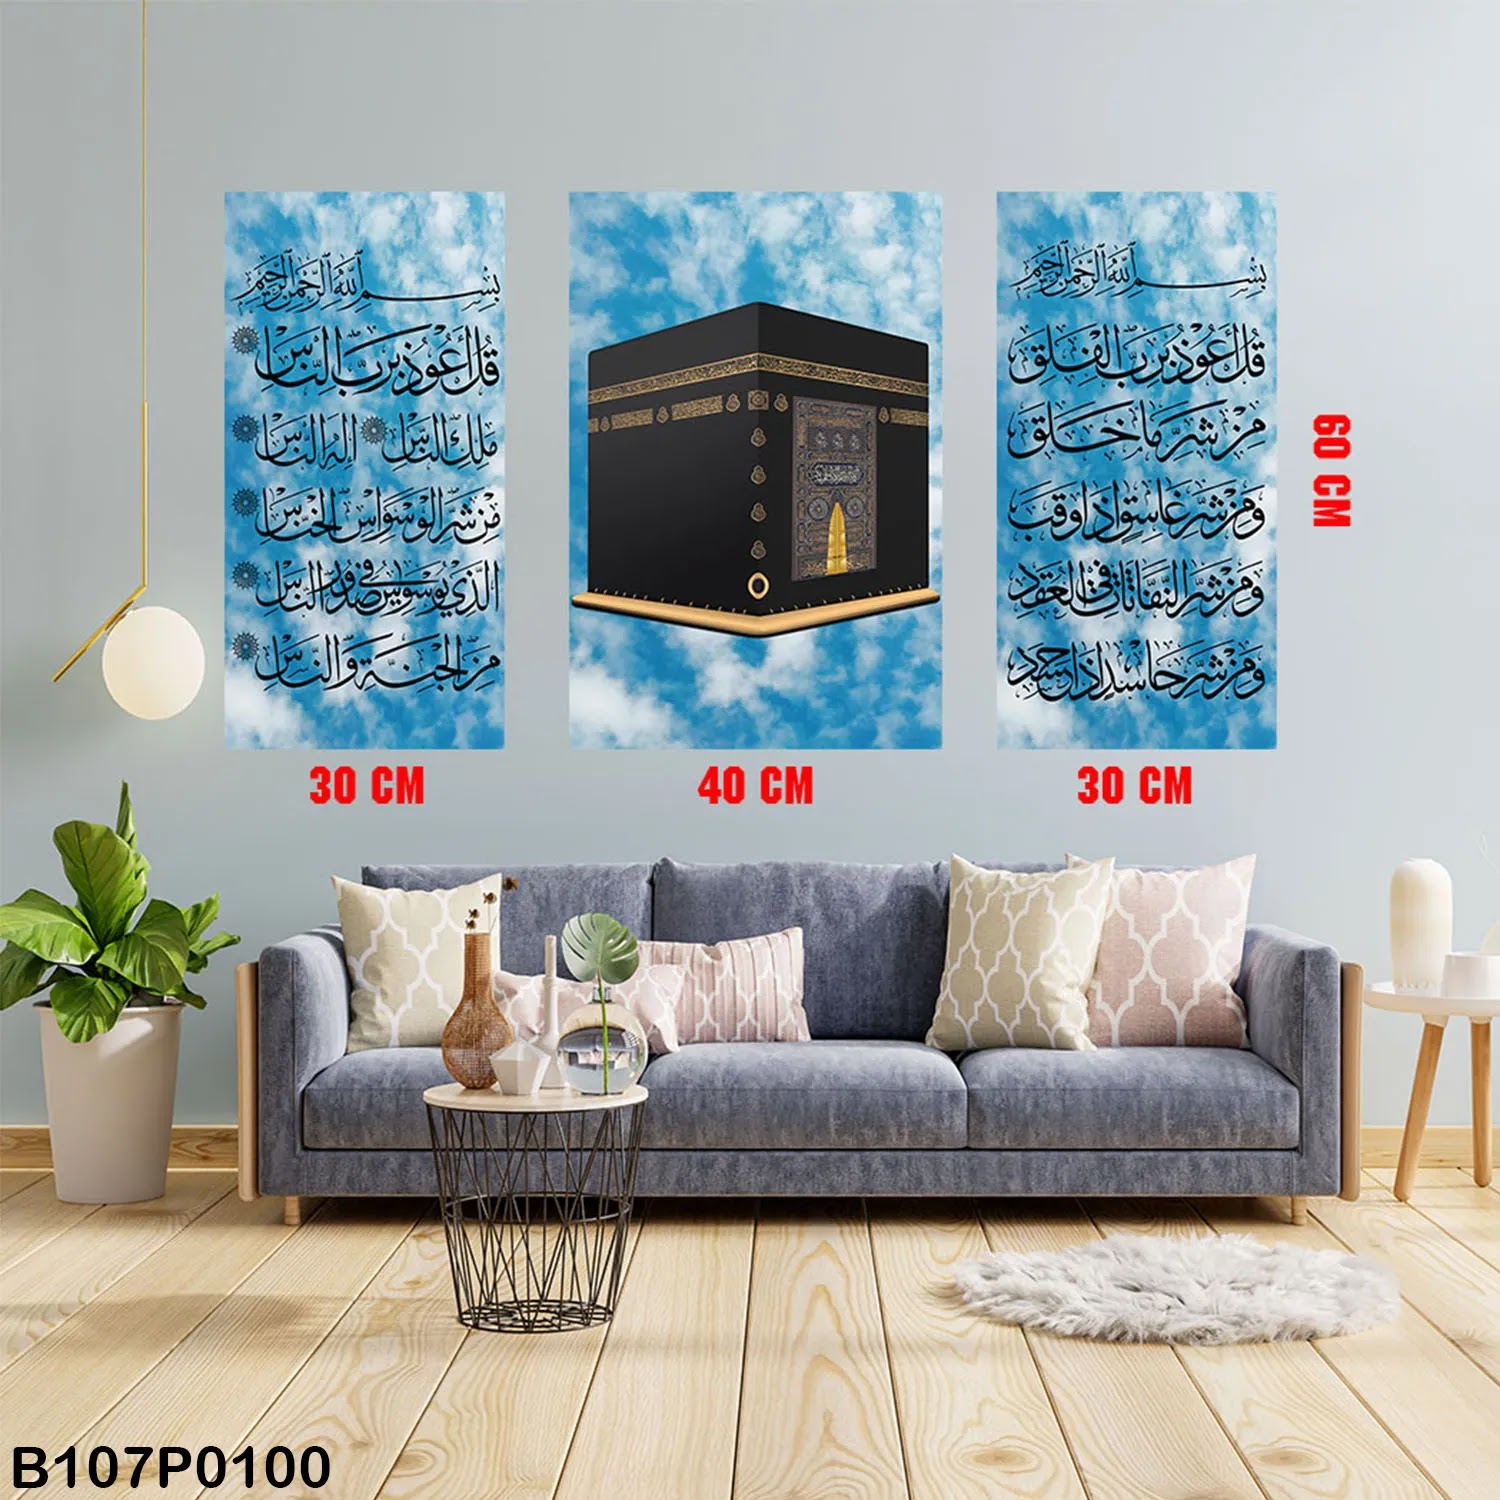 Black Triptych panel with Arabic calligraphy for (Al-Falaq- Al-Nas) and Kaaba